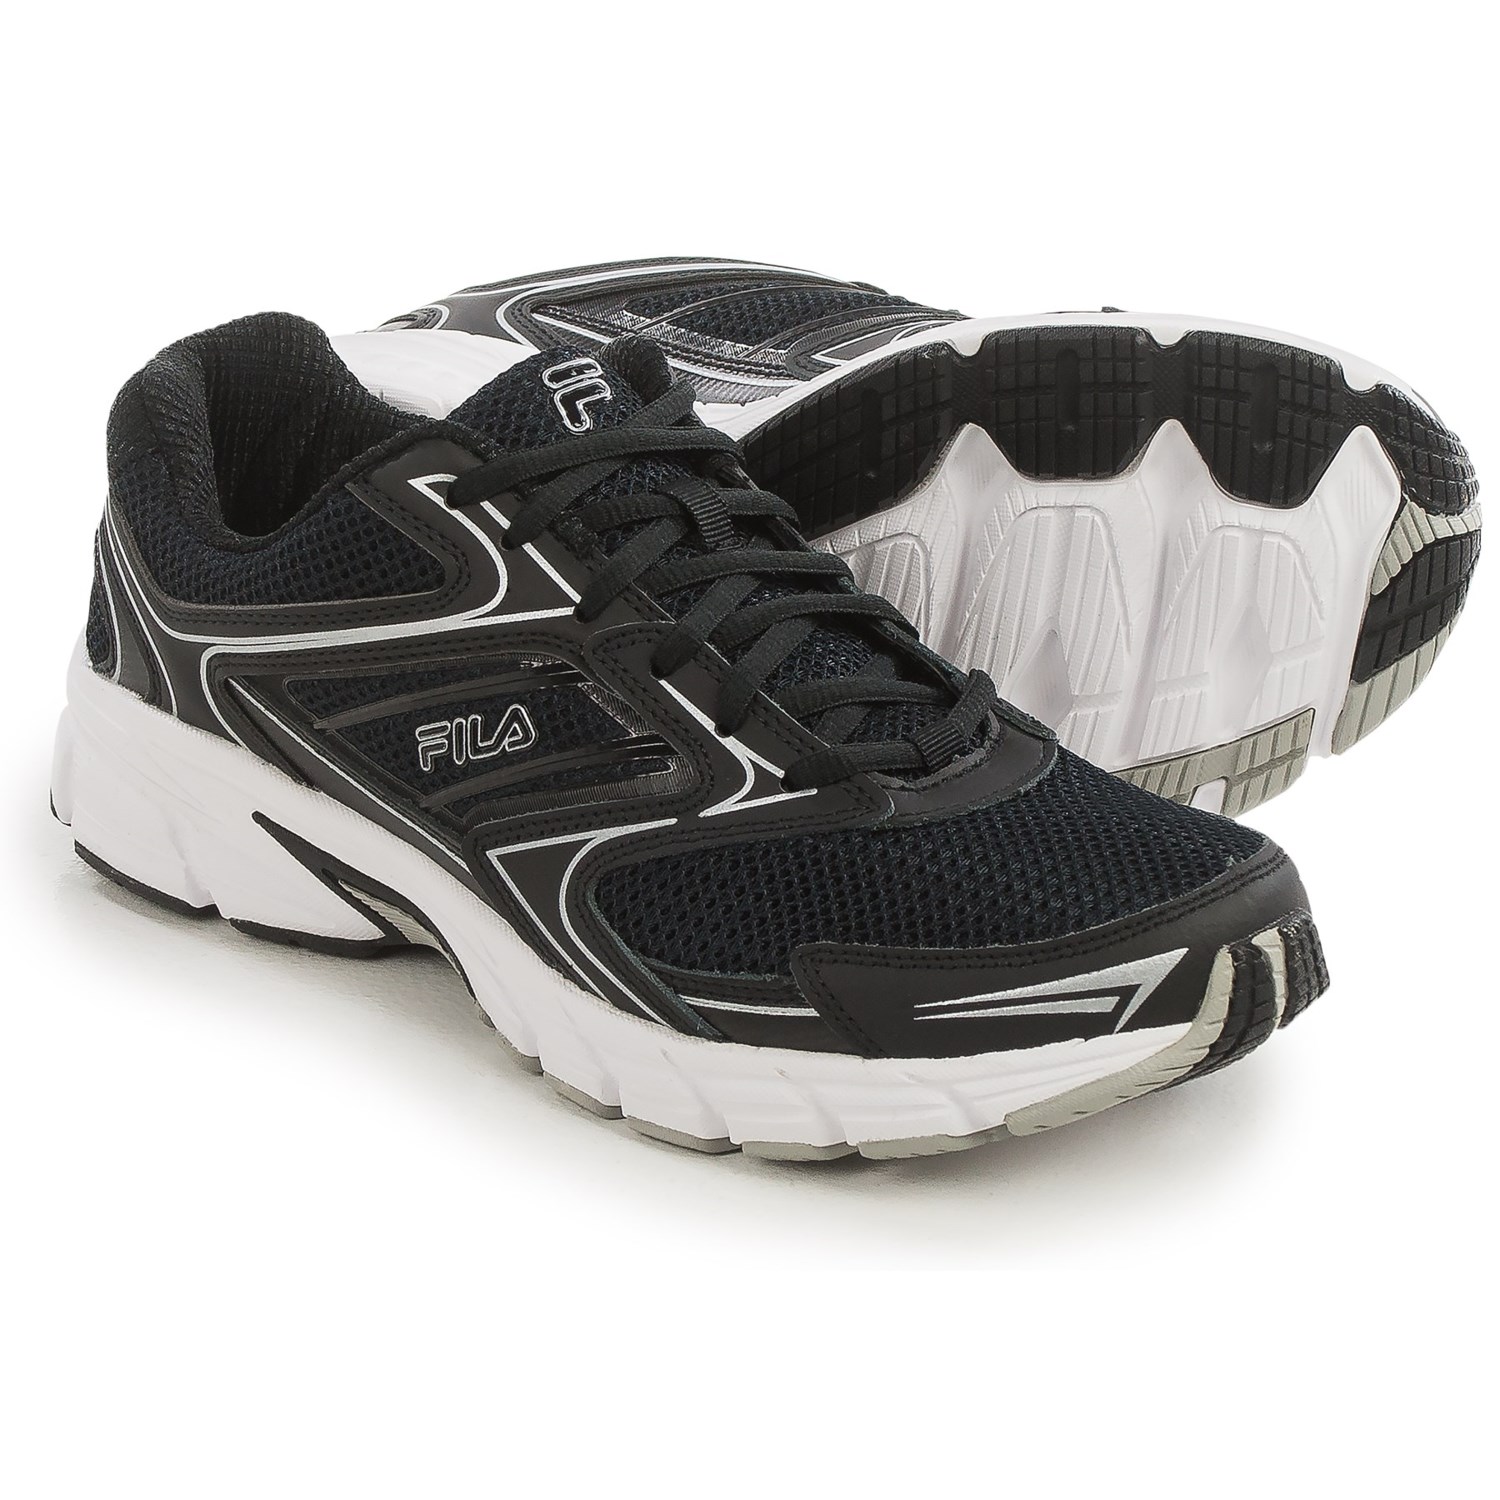 Fila Xtent 4 Running Shoes (For Men) - Save 46%